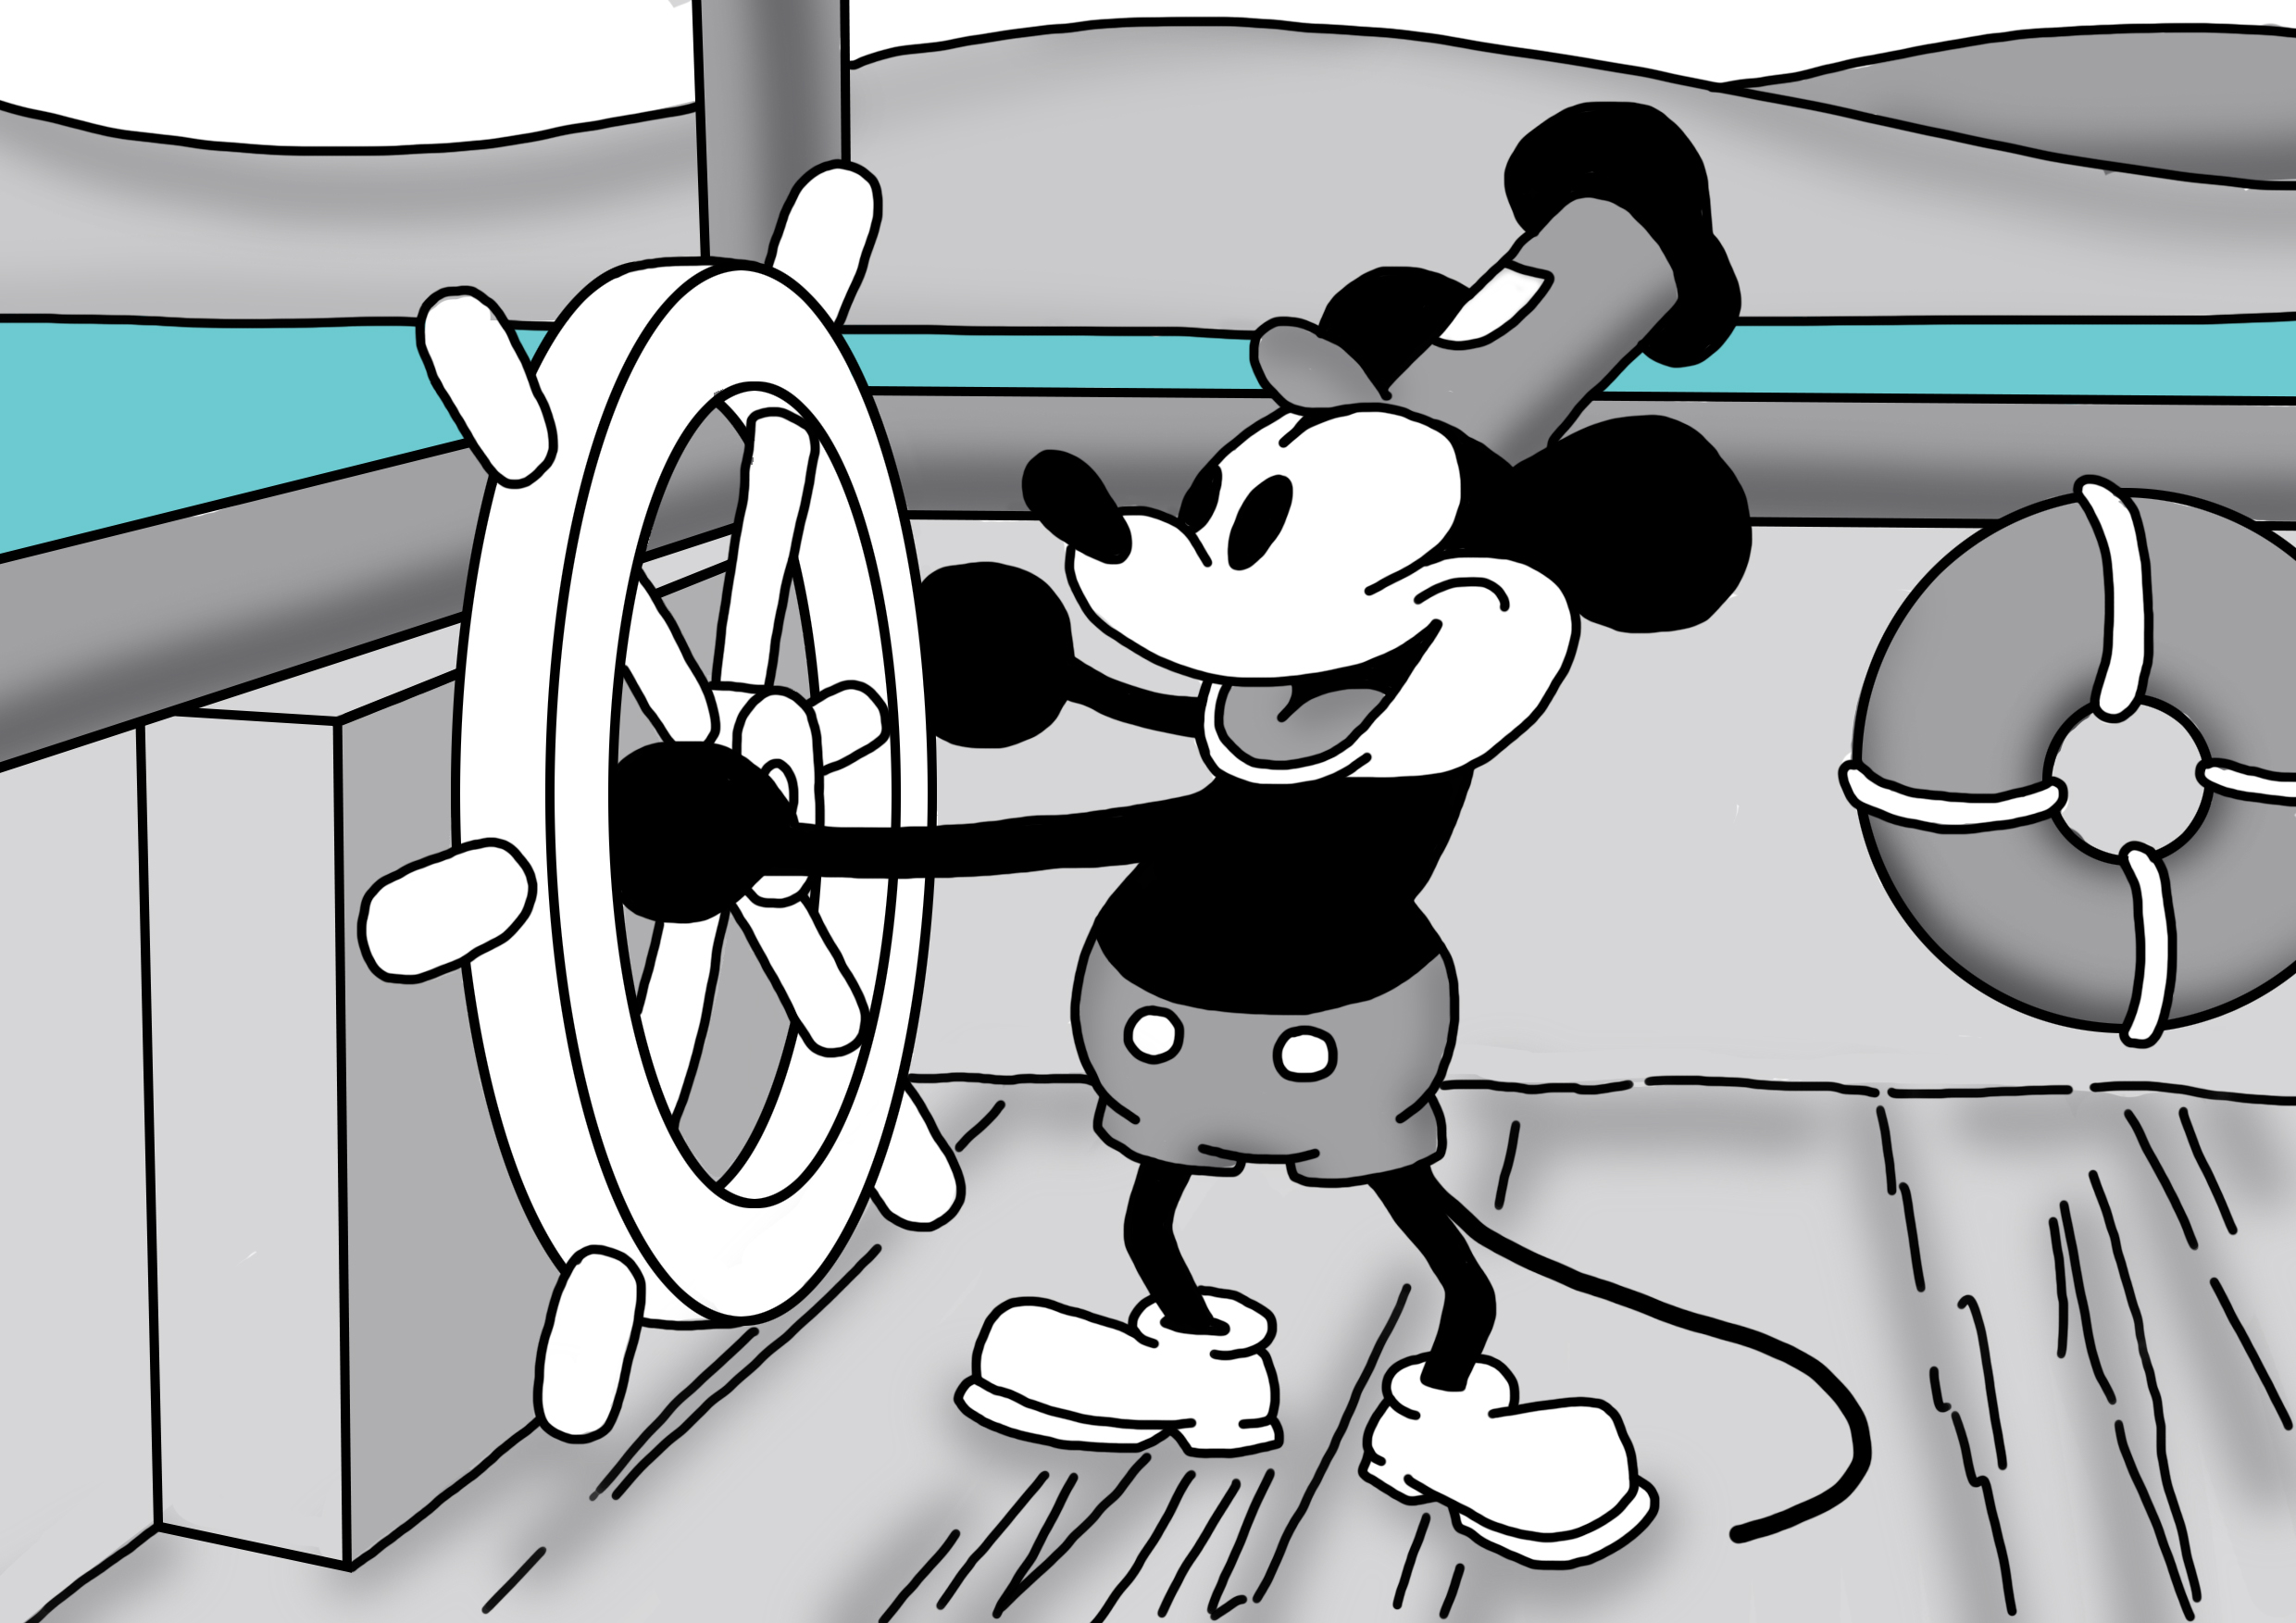 Steamboat Willie Tiles